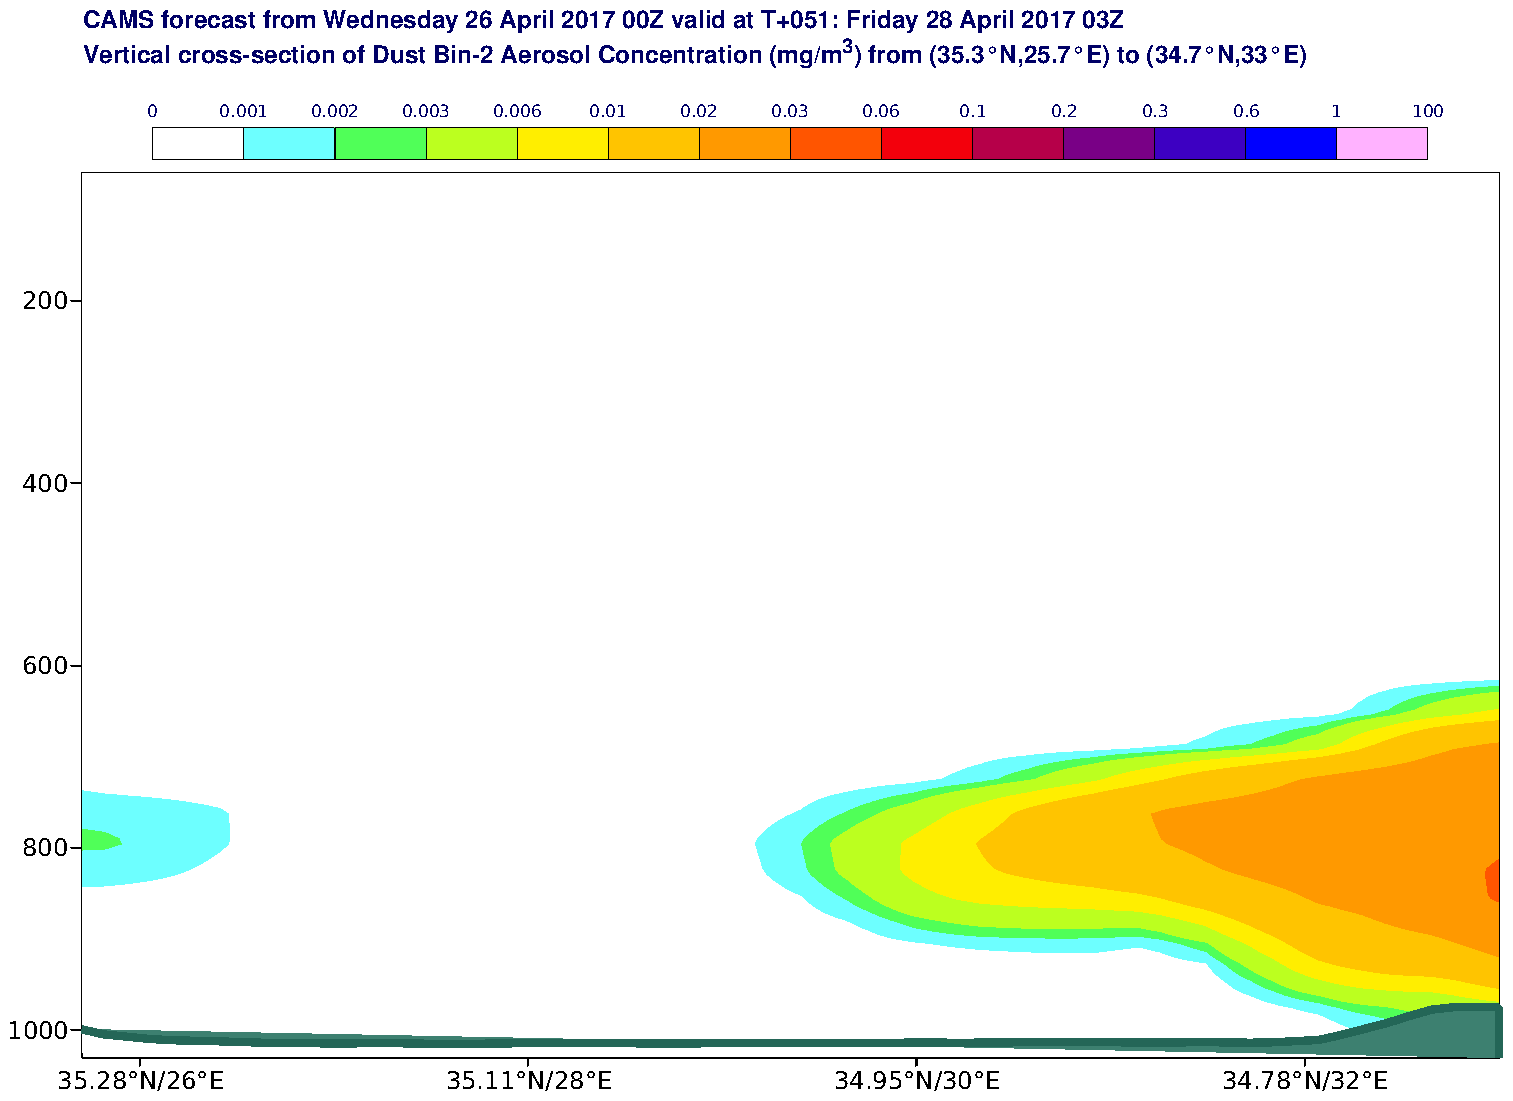 Vertical cross-section of Dust Bin-2 Aerosol Concentration (mg/m3) valid at T51 - 2017-04-28 03:00